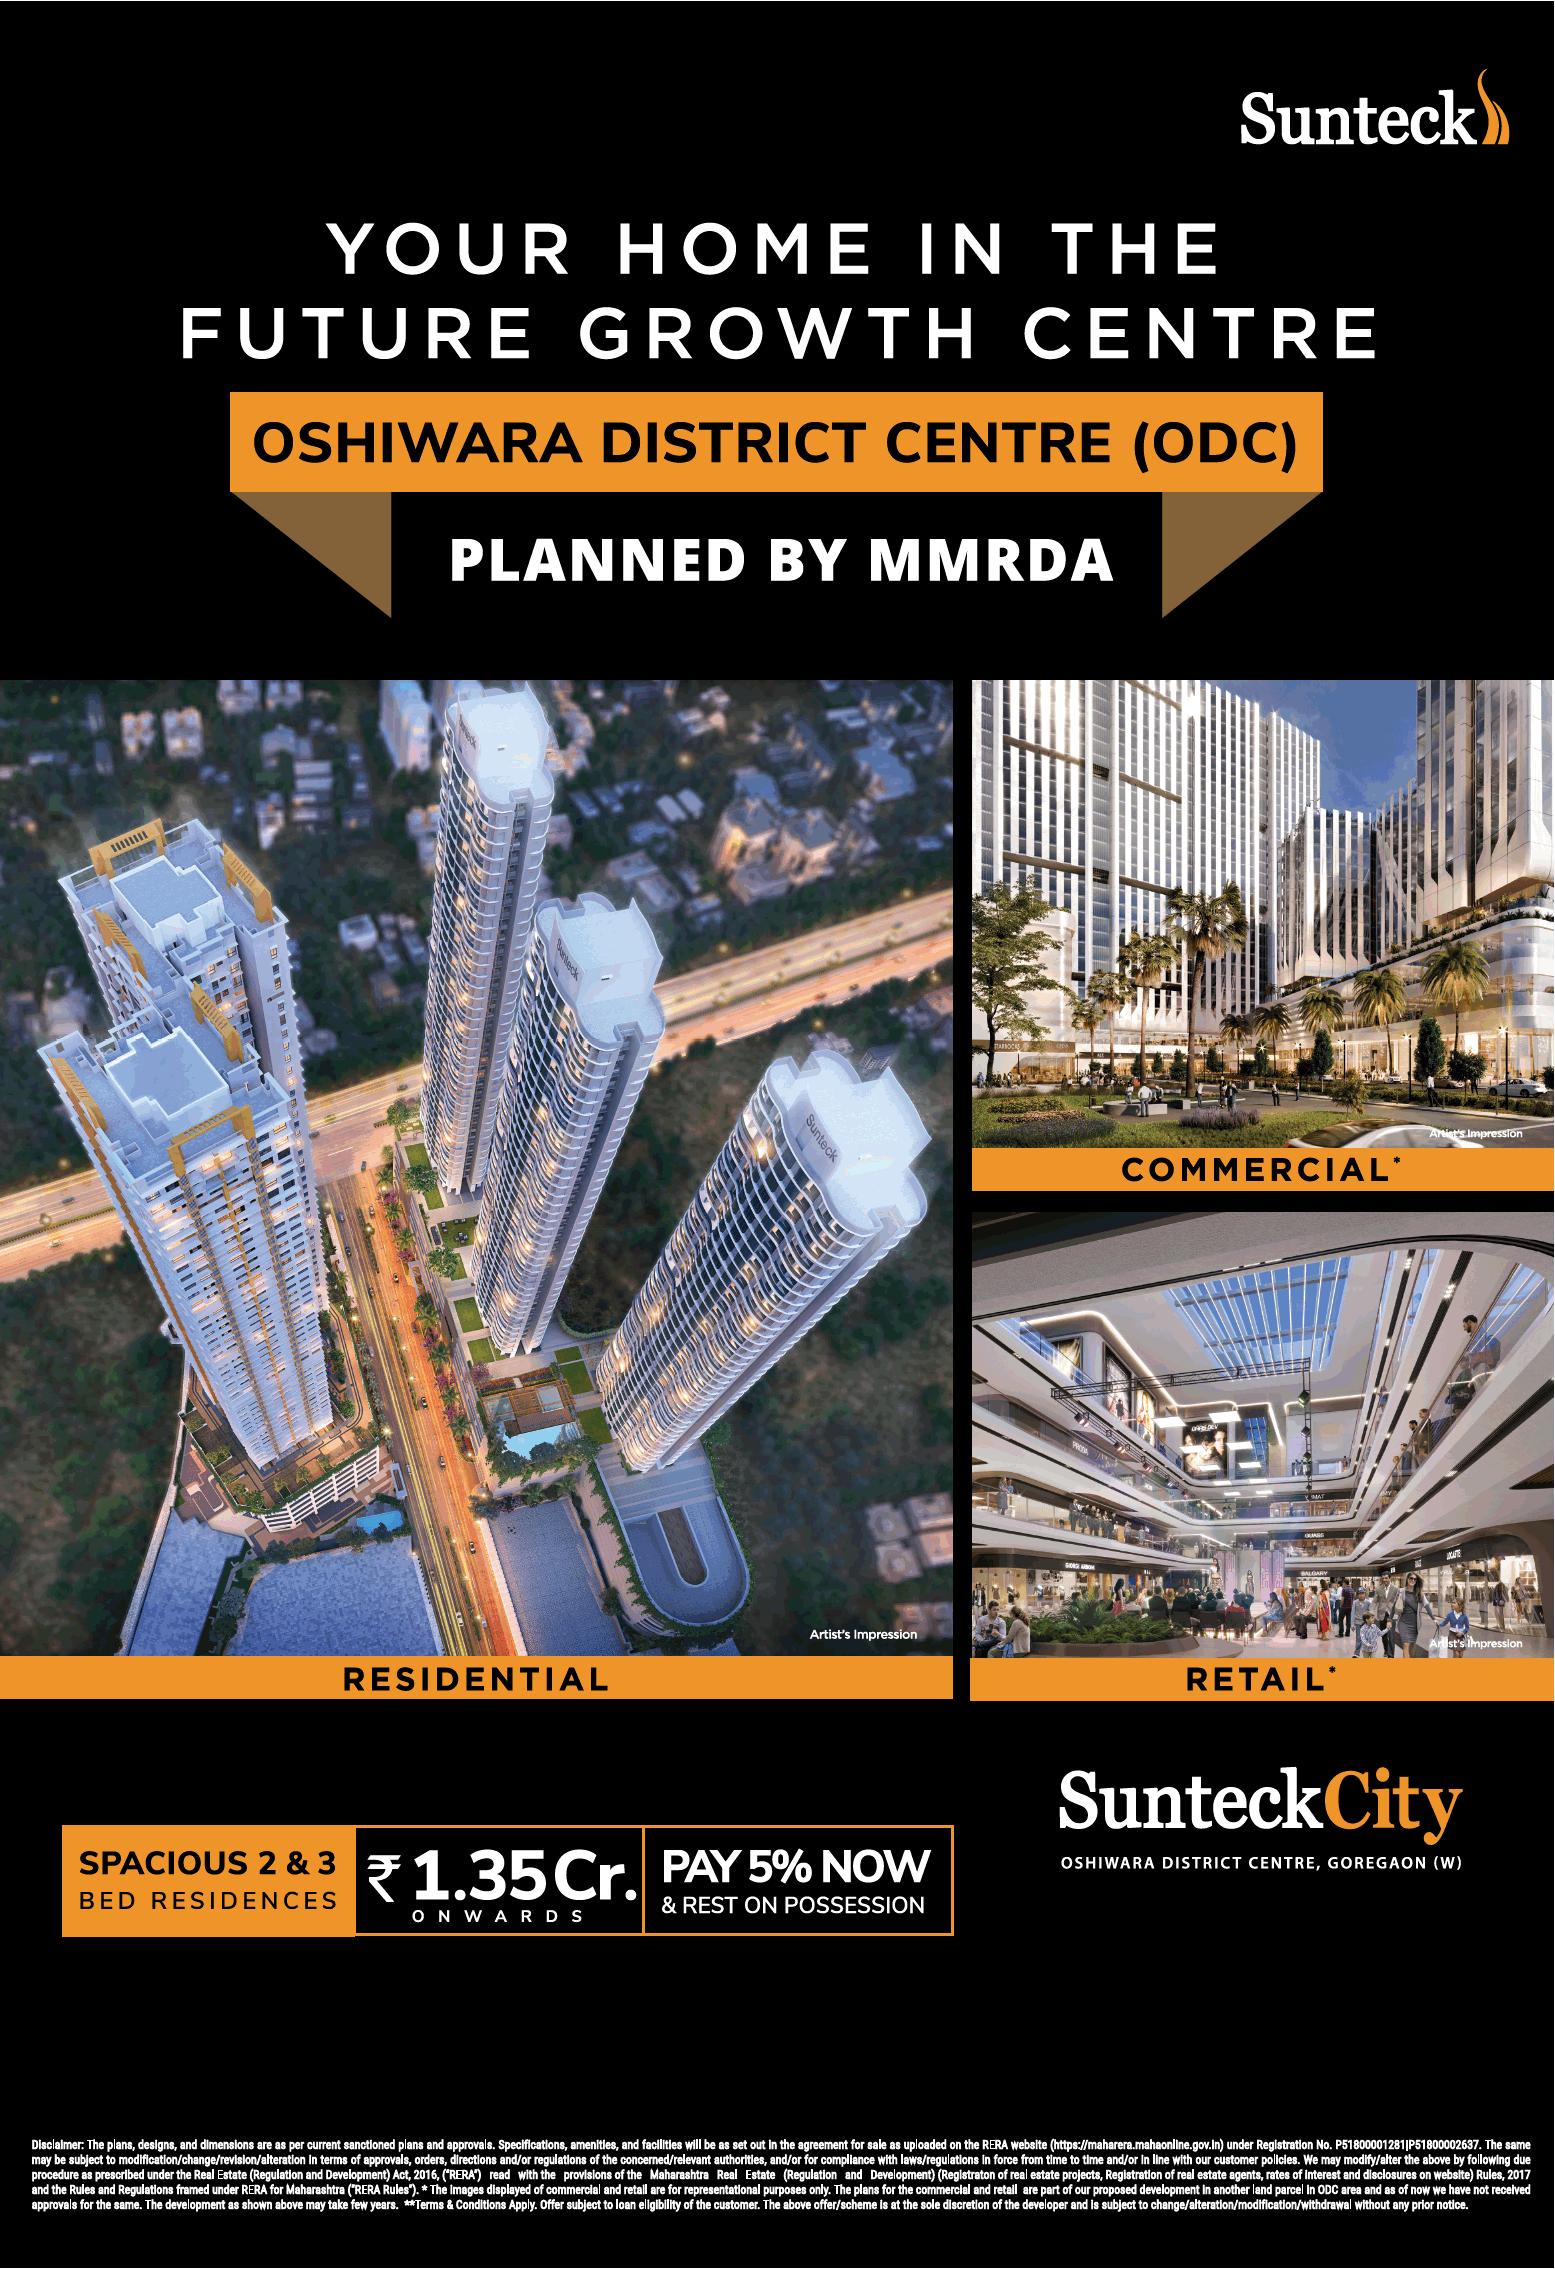 Pay 5% now & rest on possession at Sunteck City in Mumbai